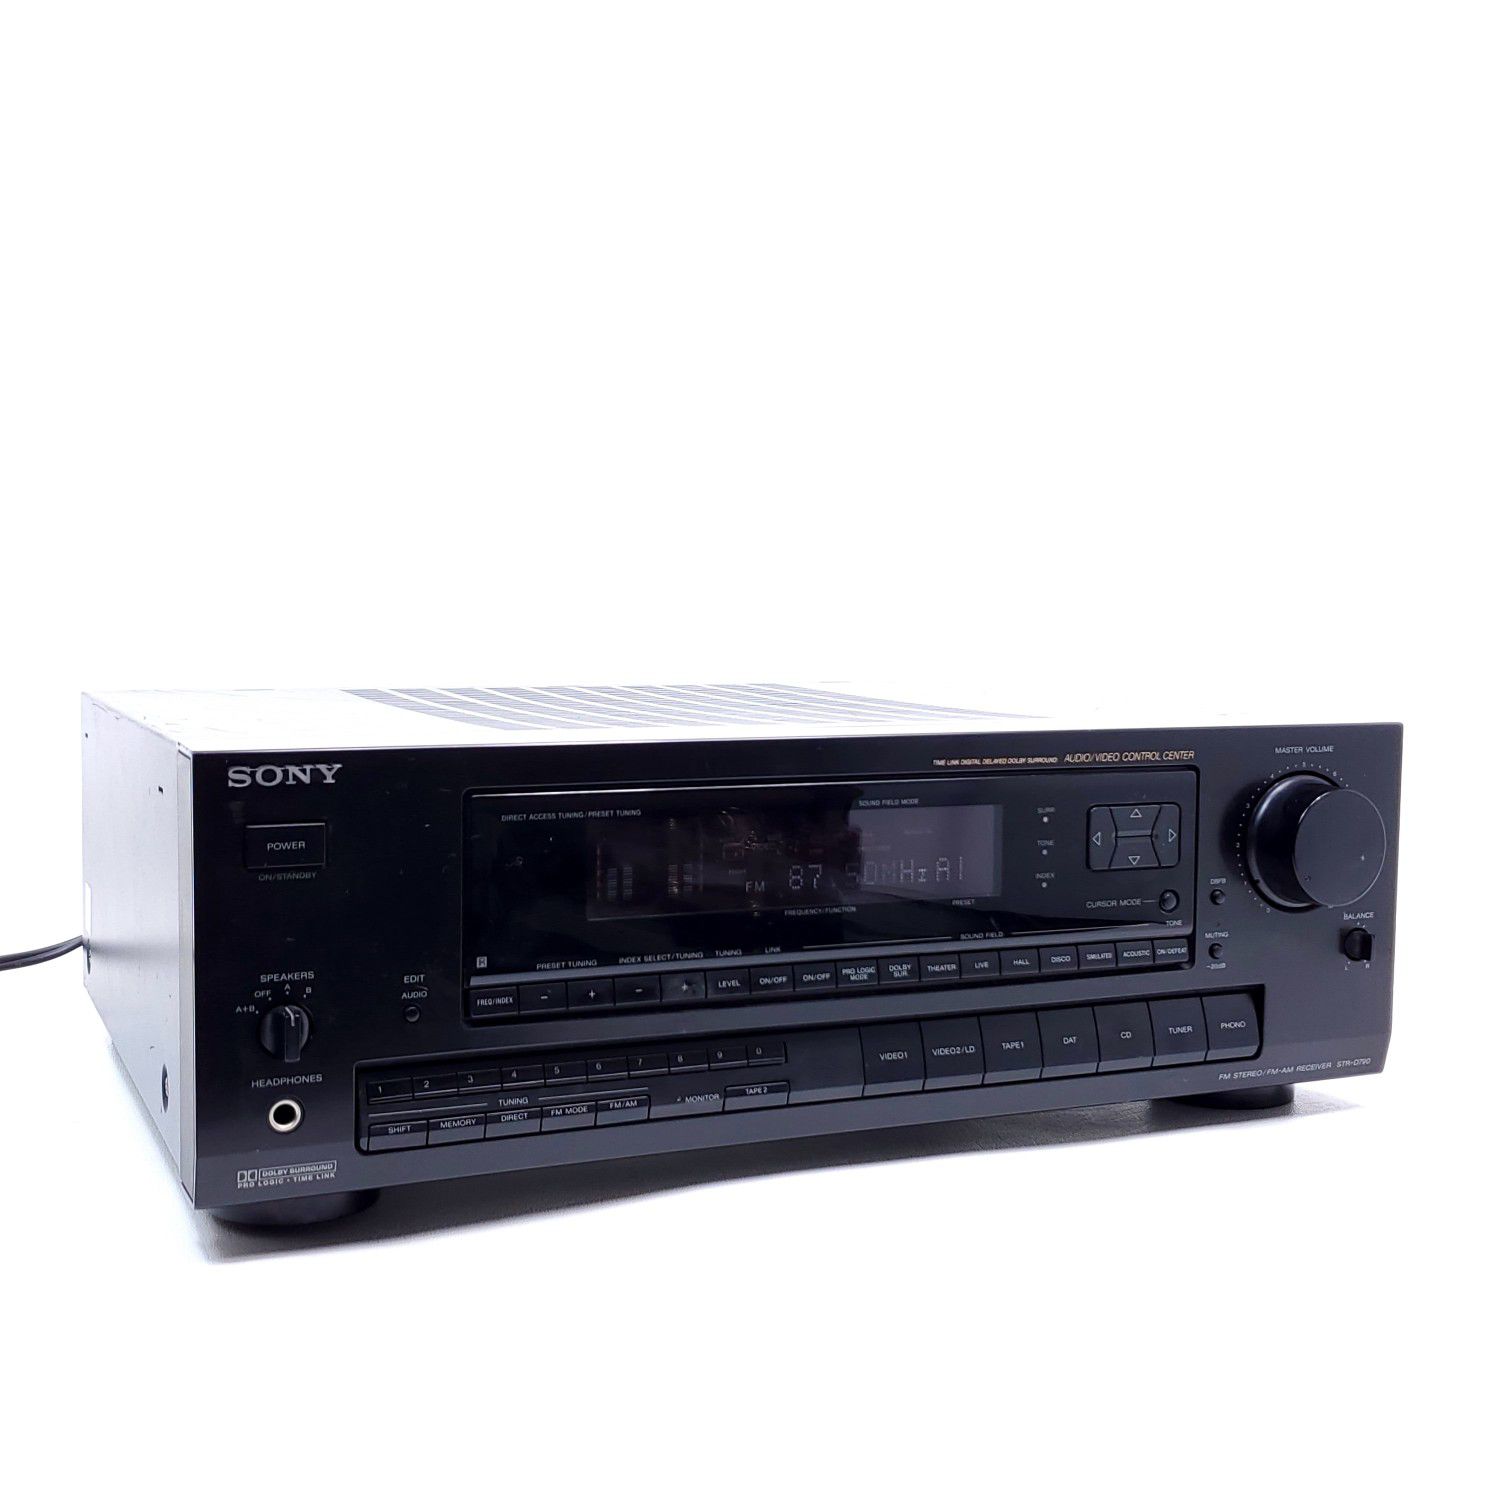 Sony Stereo Audio Video Receiver,Tuner, with Phono In! No remote, Works Great!! $55 OBO!